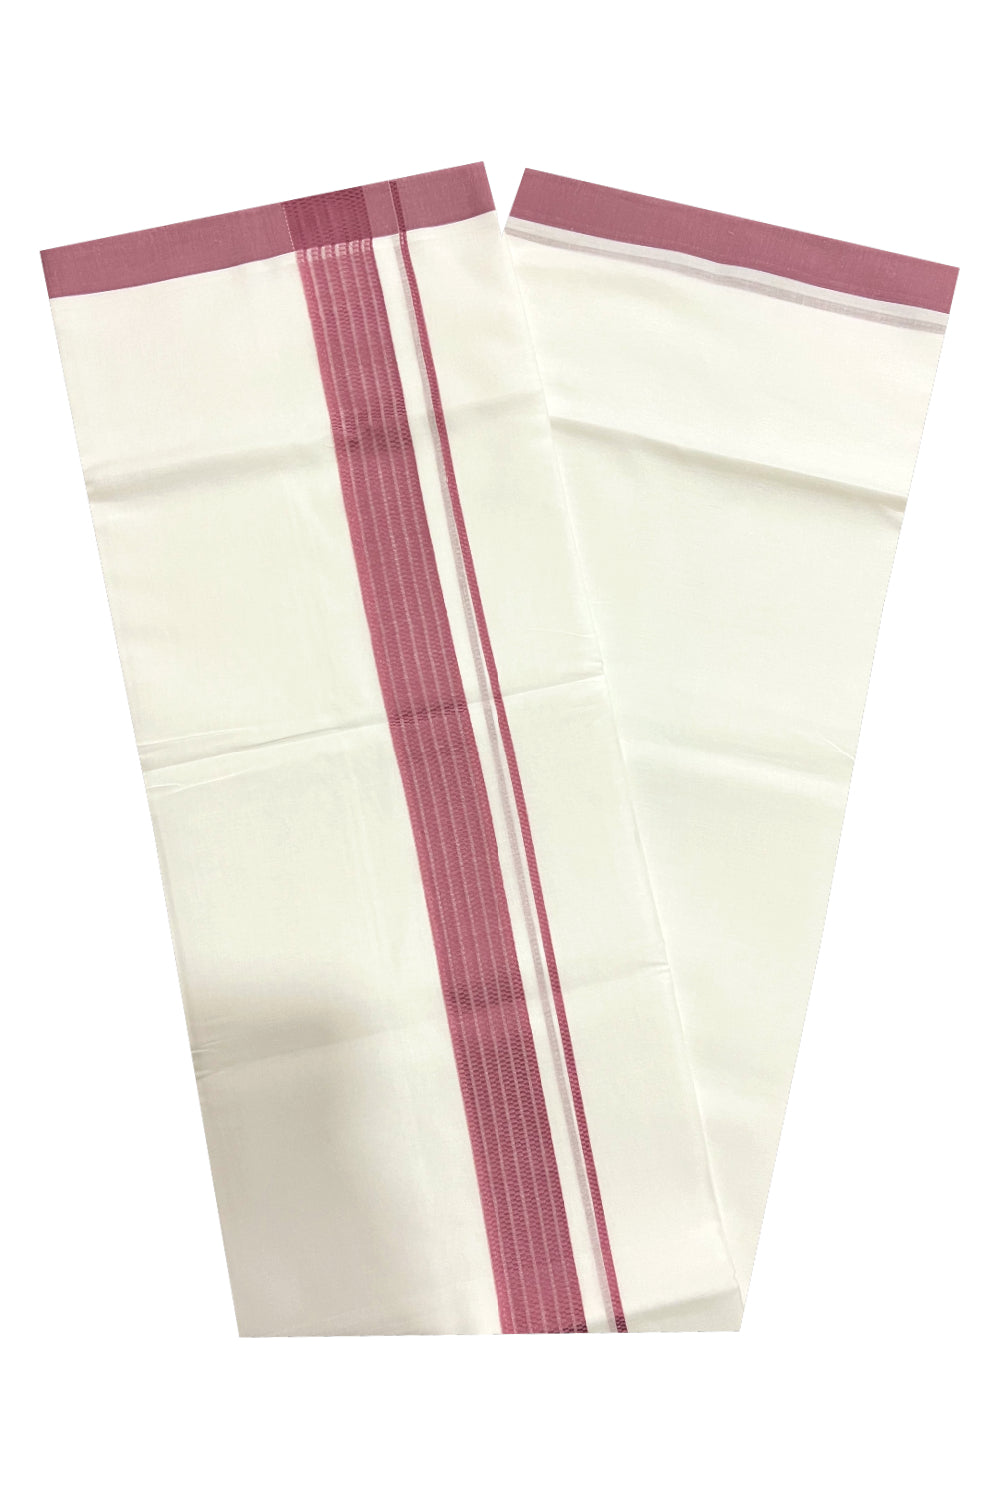 Pure White Cotton Double Mundu with Lines on Mauve Border (South Indian Dhoti)